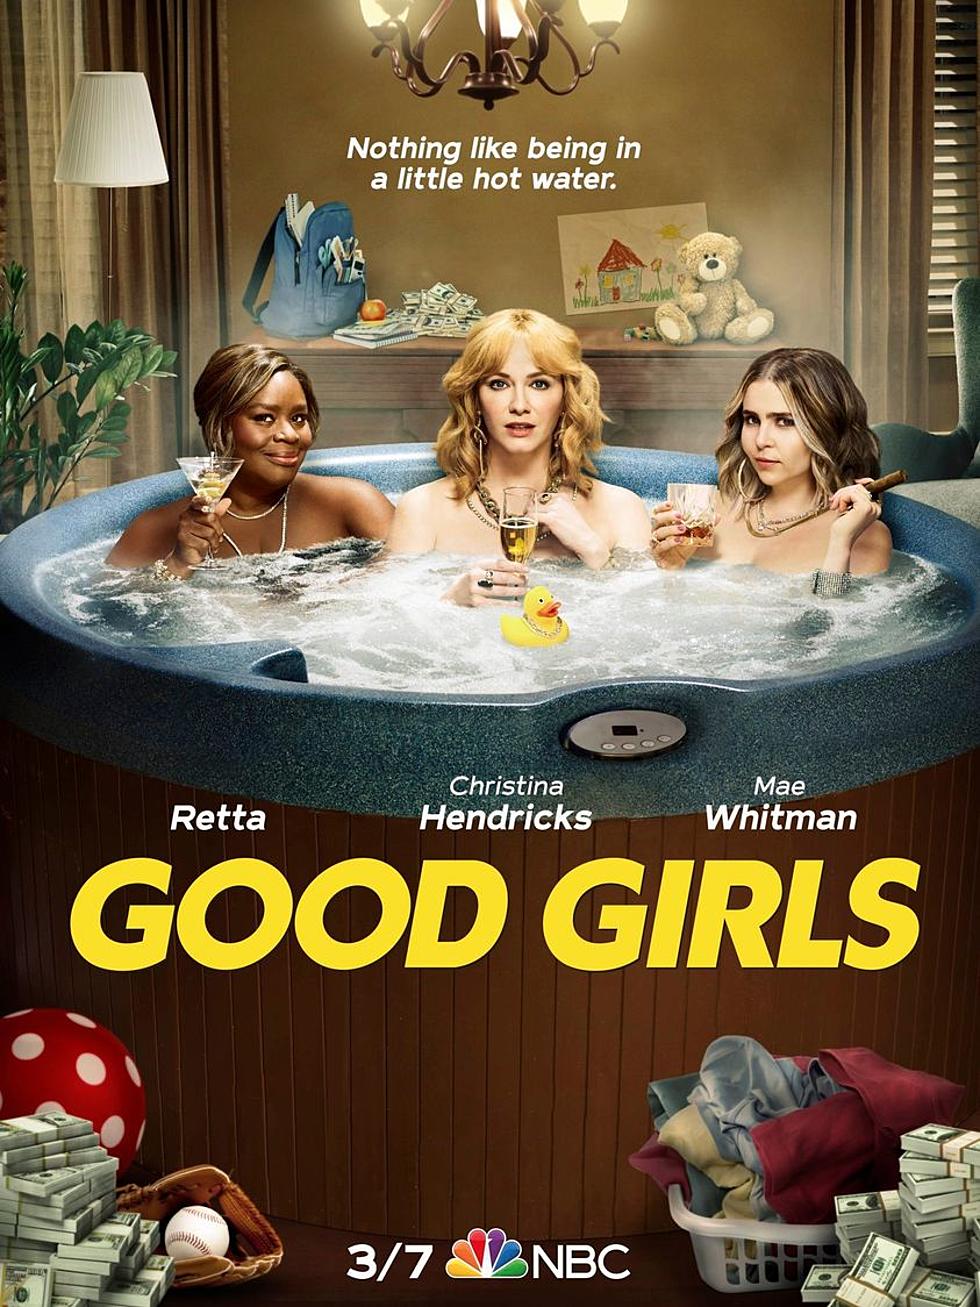 Did You Know The Show “Good Girls” Based In Michigan? [VIDEO]